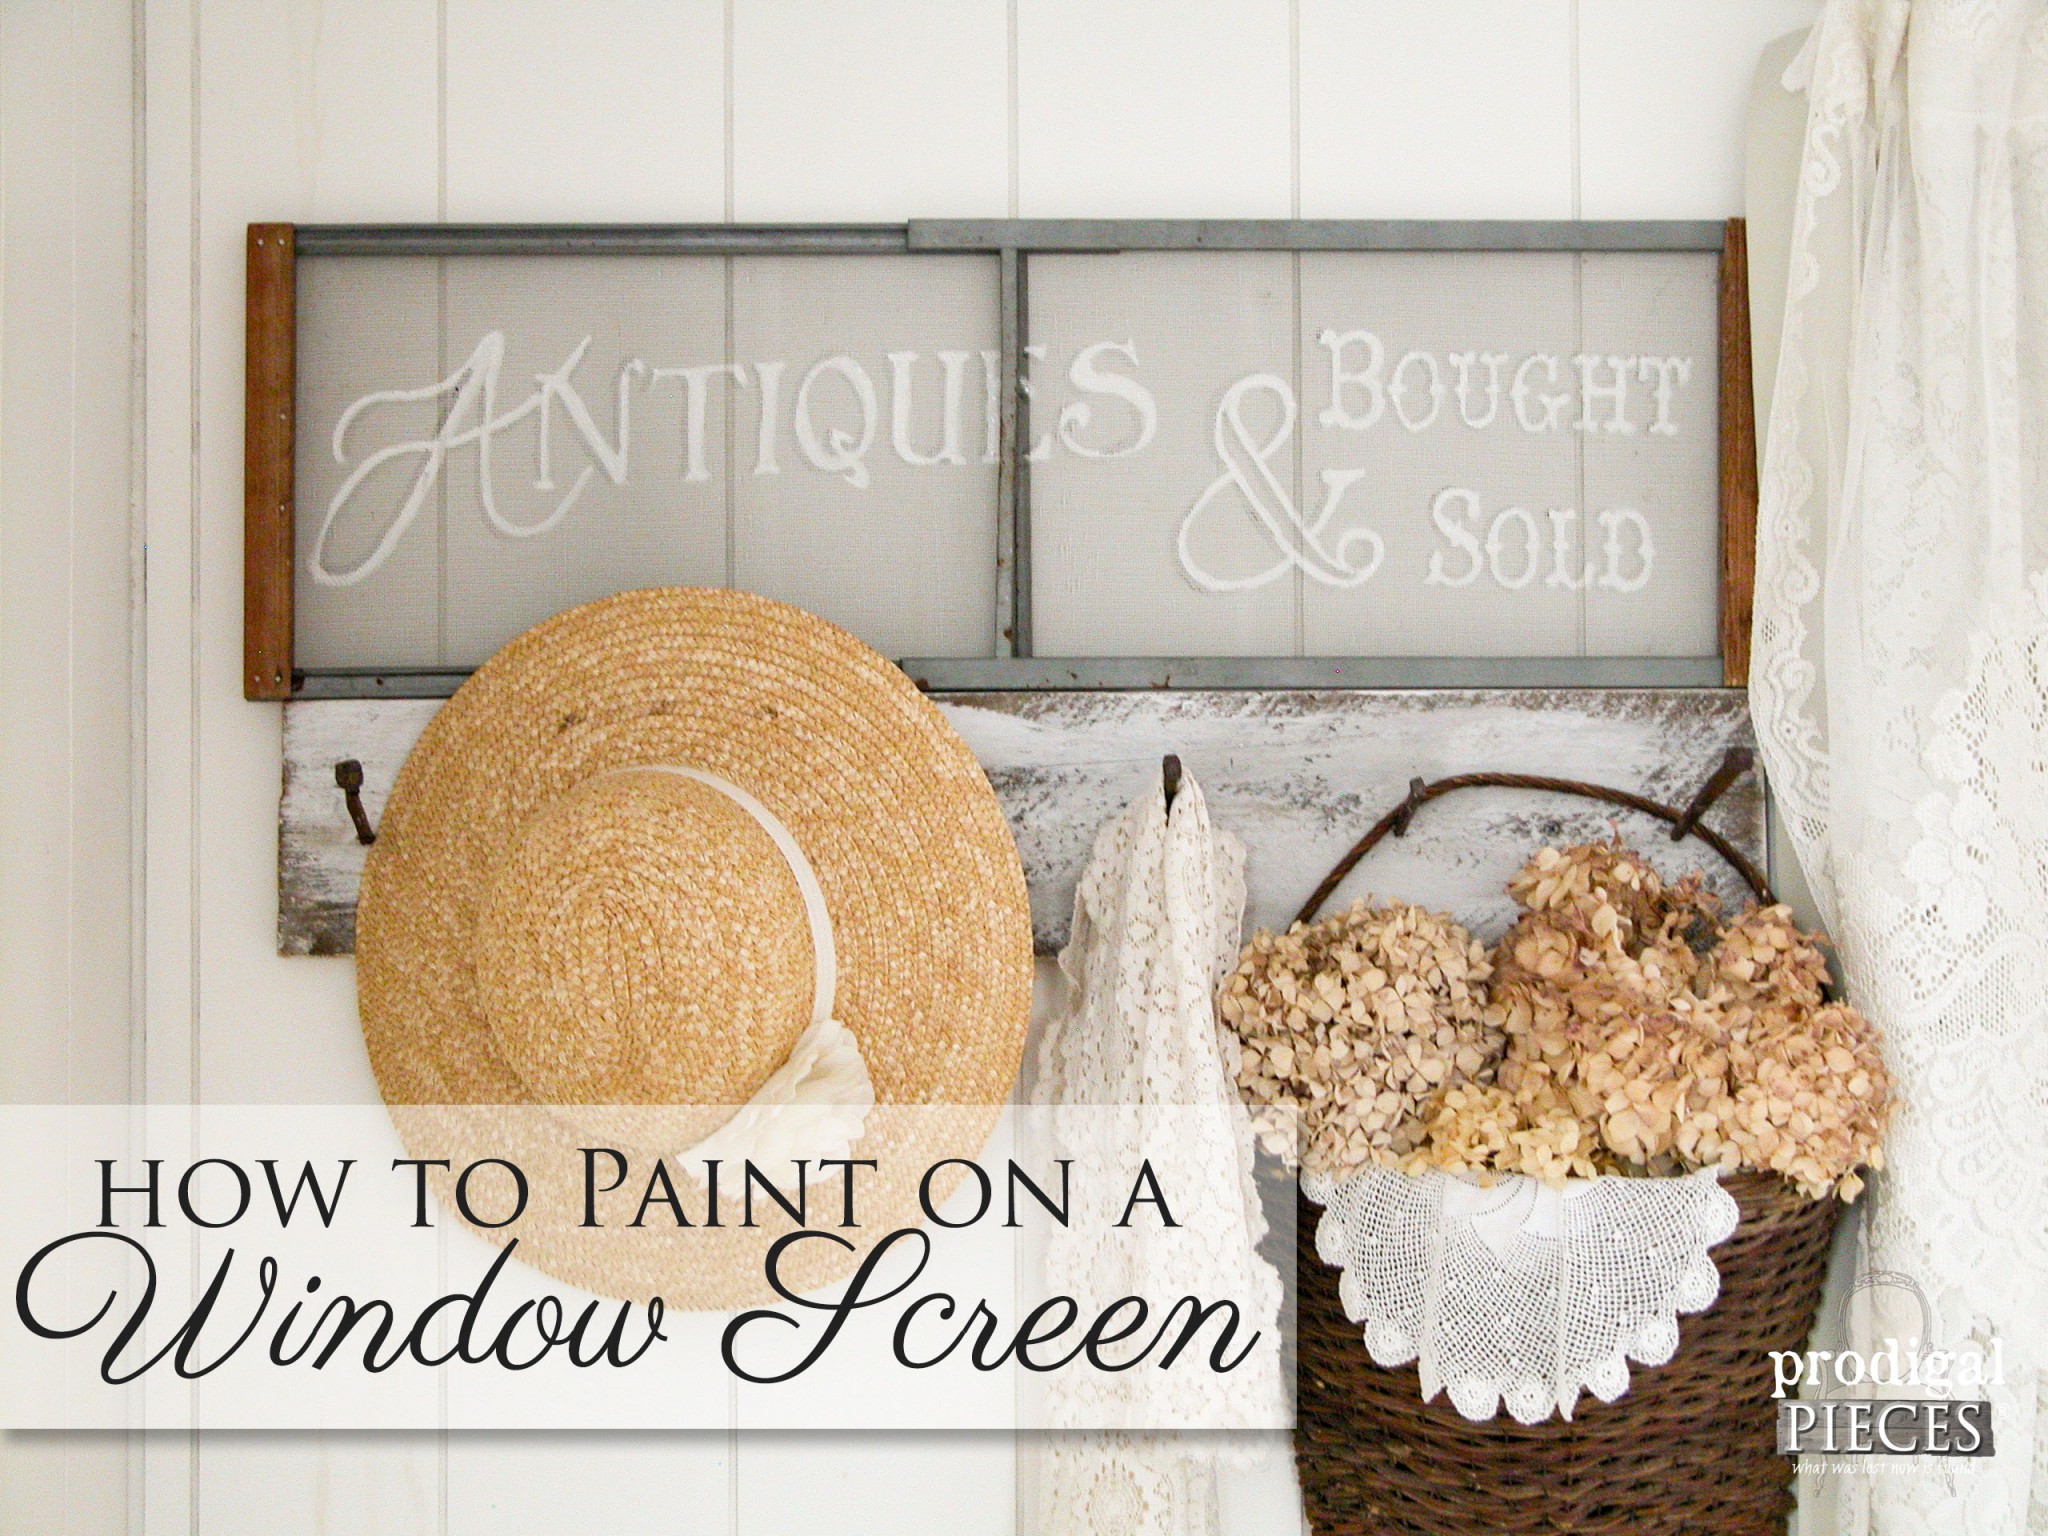 DIY Window Paint: Easy Step-by-Step Guide & Tips for Success